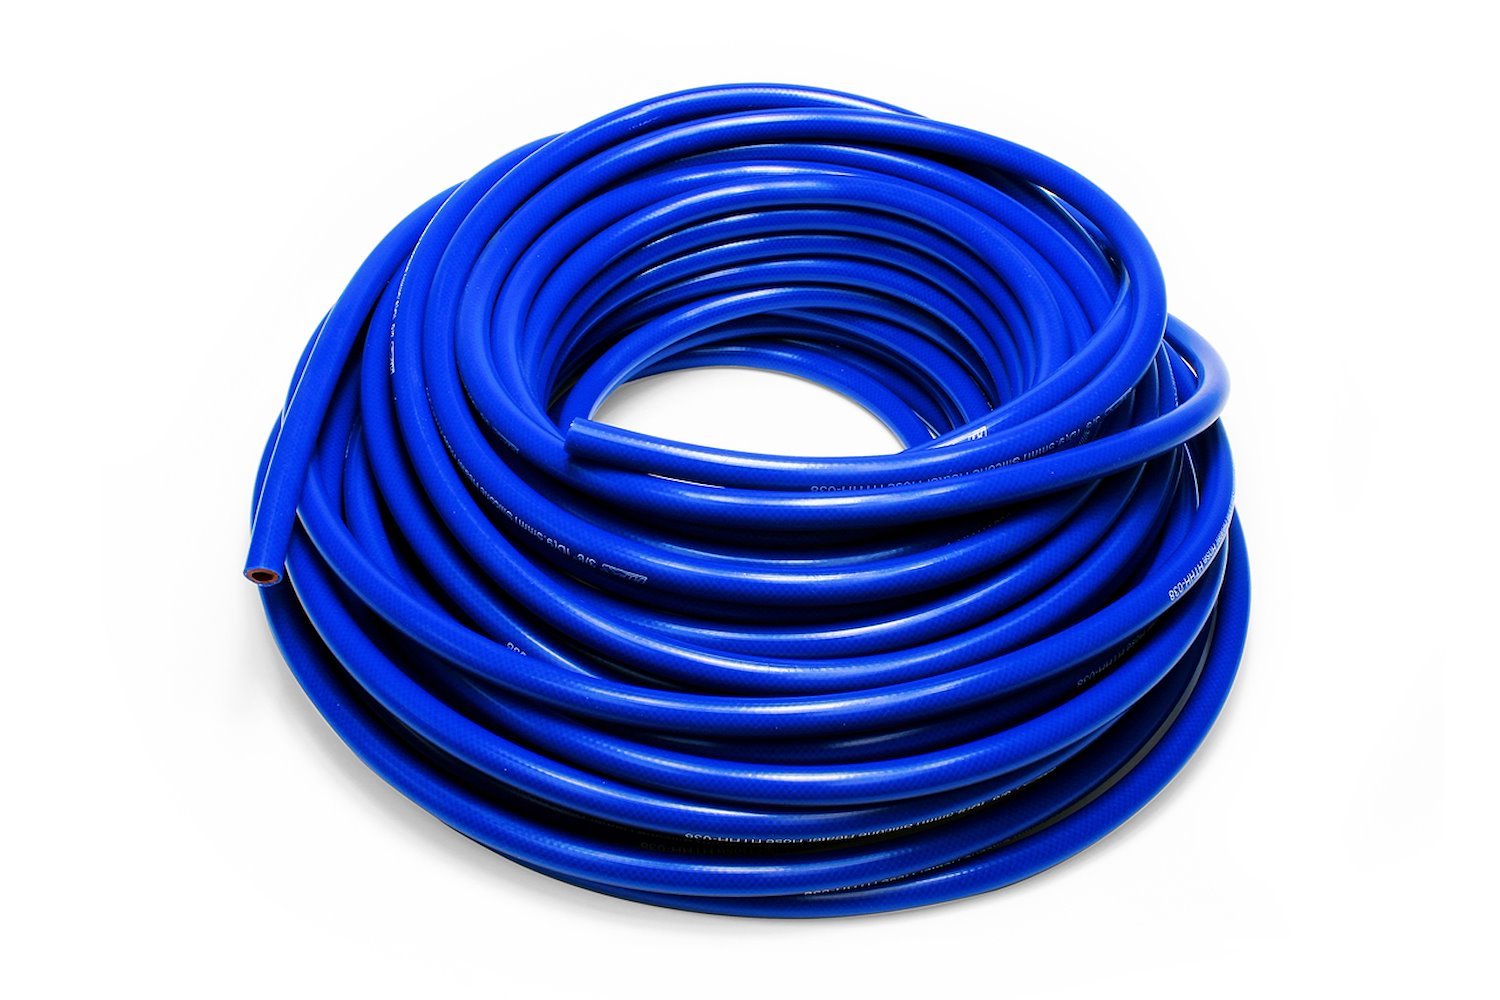 HTHH-016-BLUEx50 Silicone Heater Hose Tubing, High-Temp Reinforced, 5/32 in. ID, 50 ft. Roll, Blue